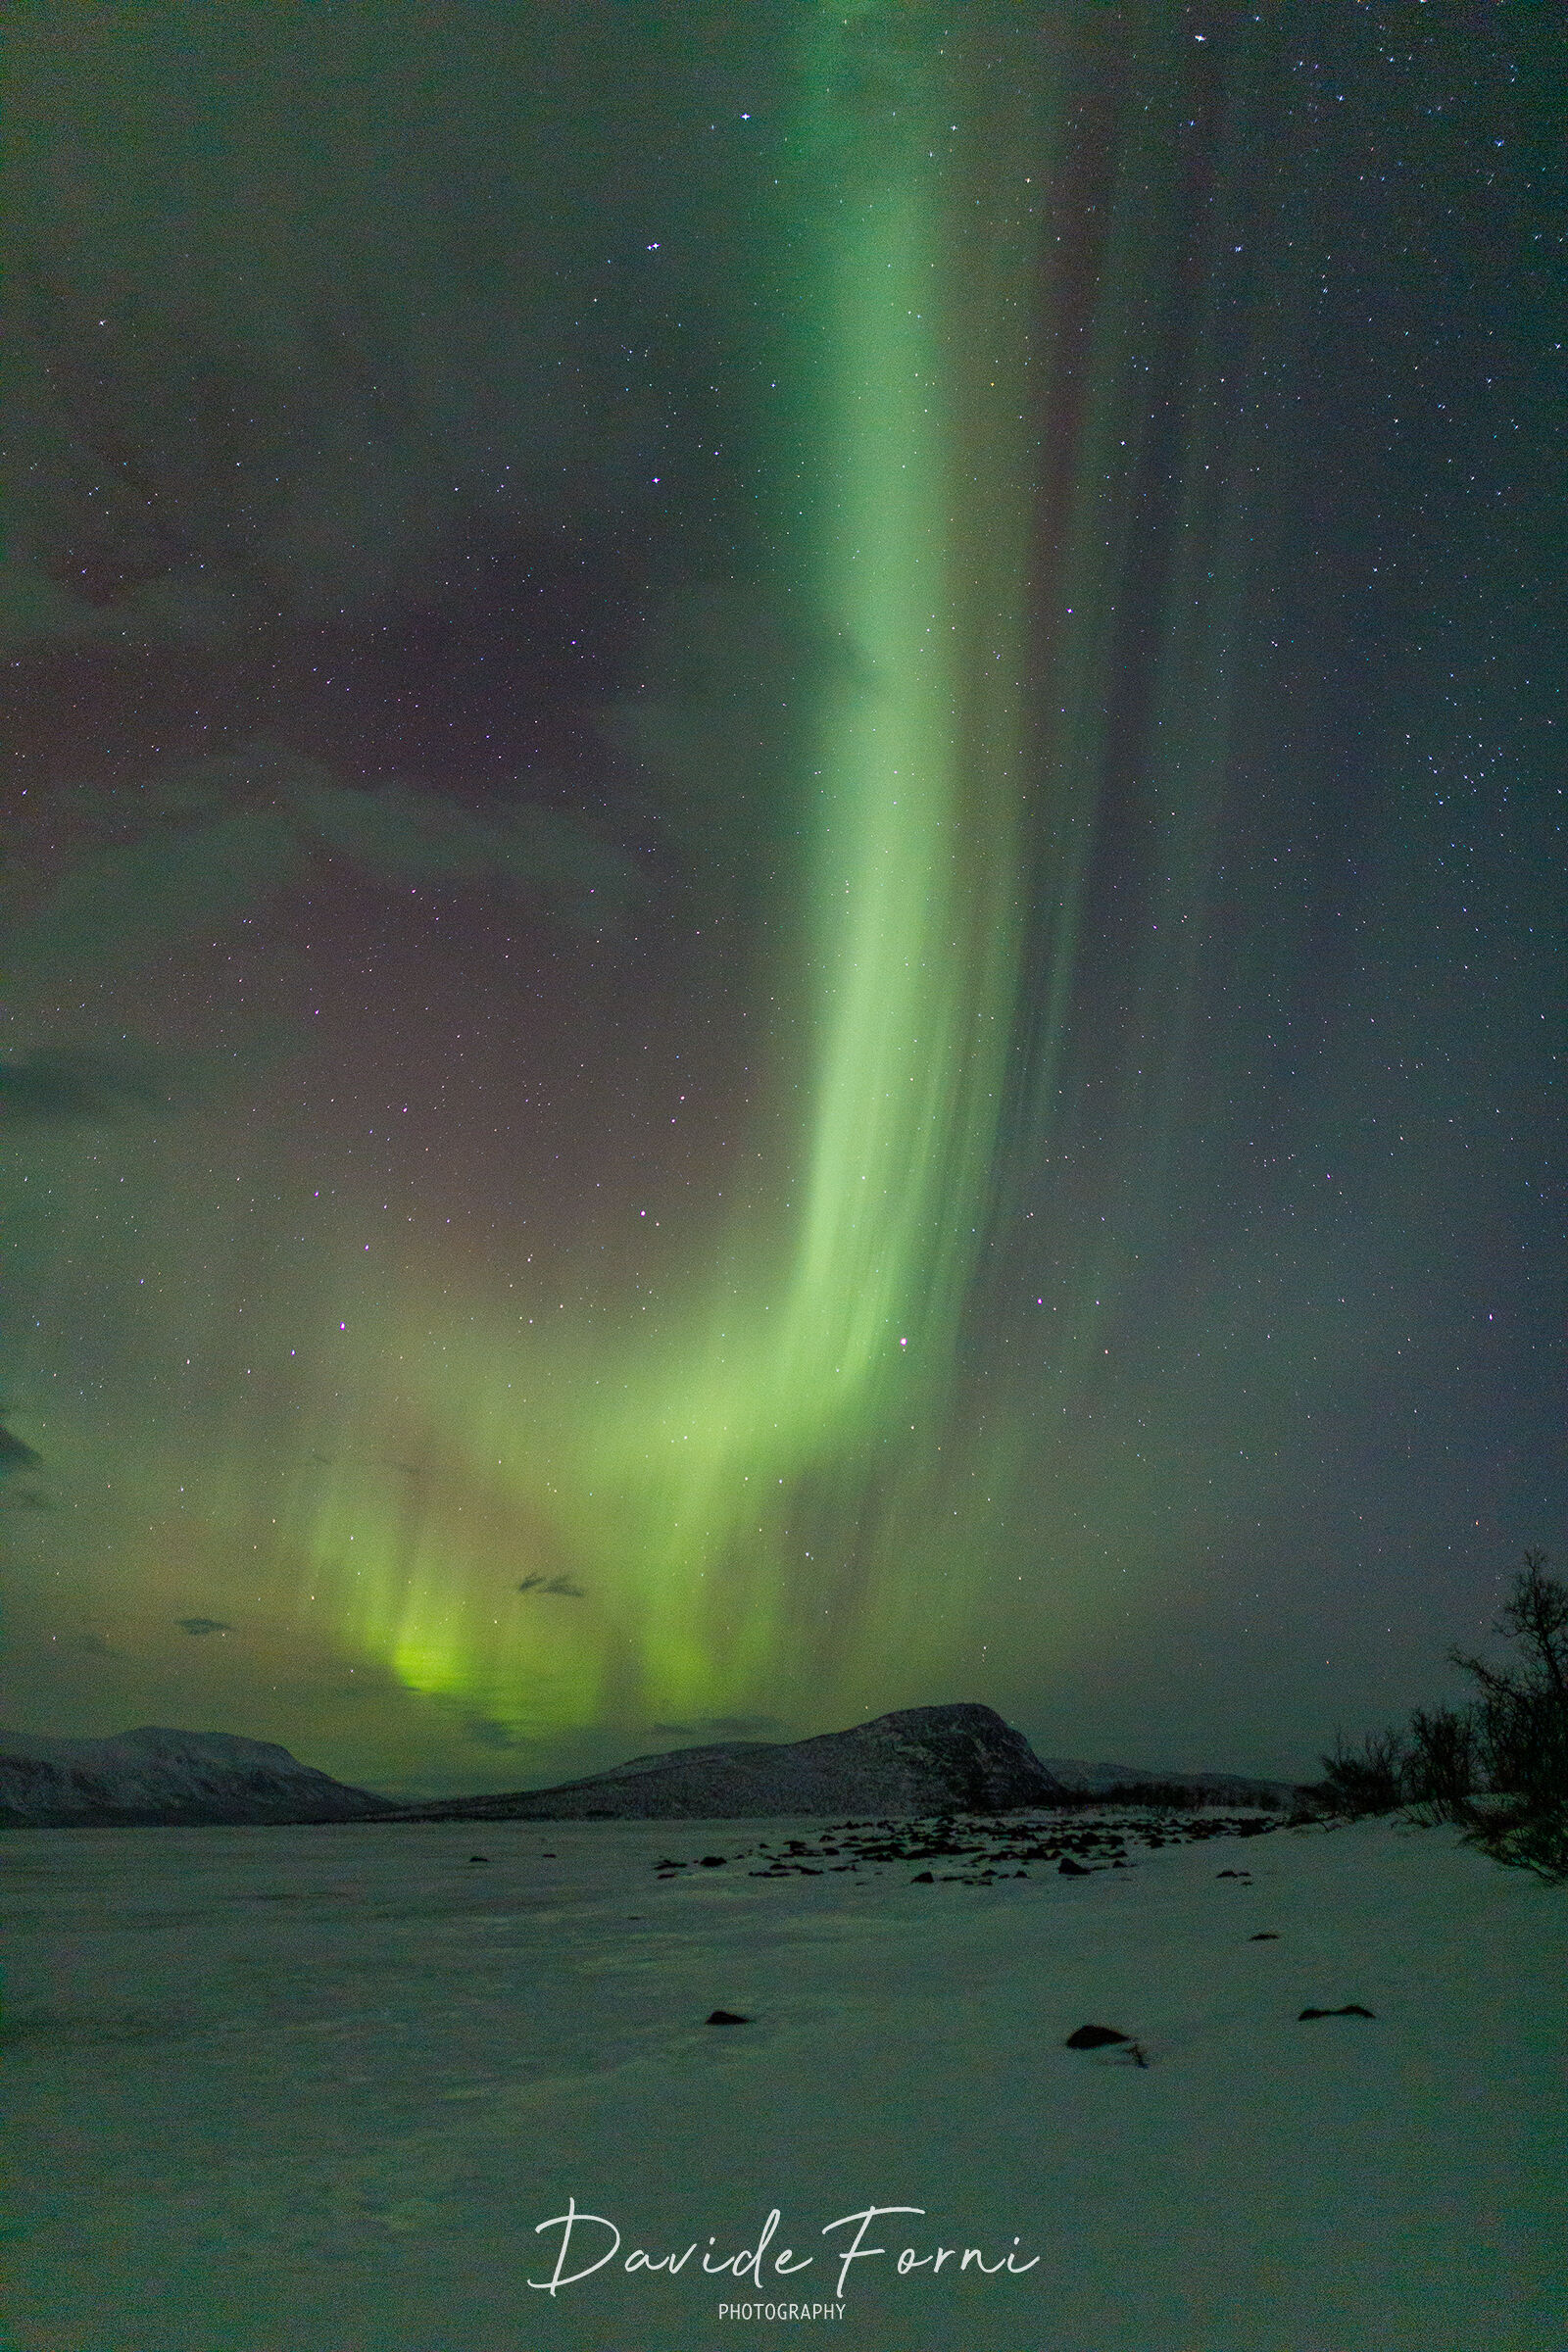 The spectacle of the Northern Lights, explosion of colors...